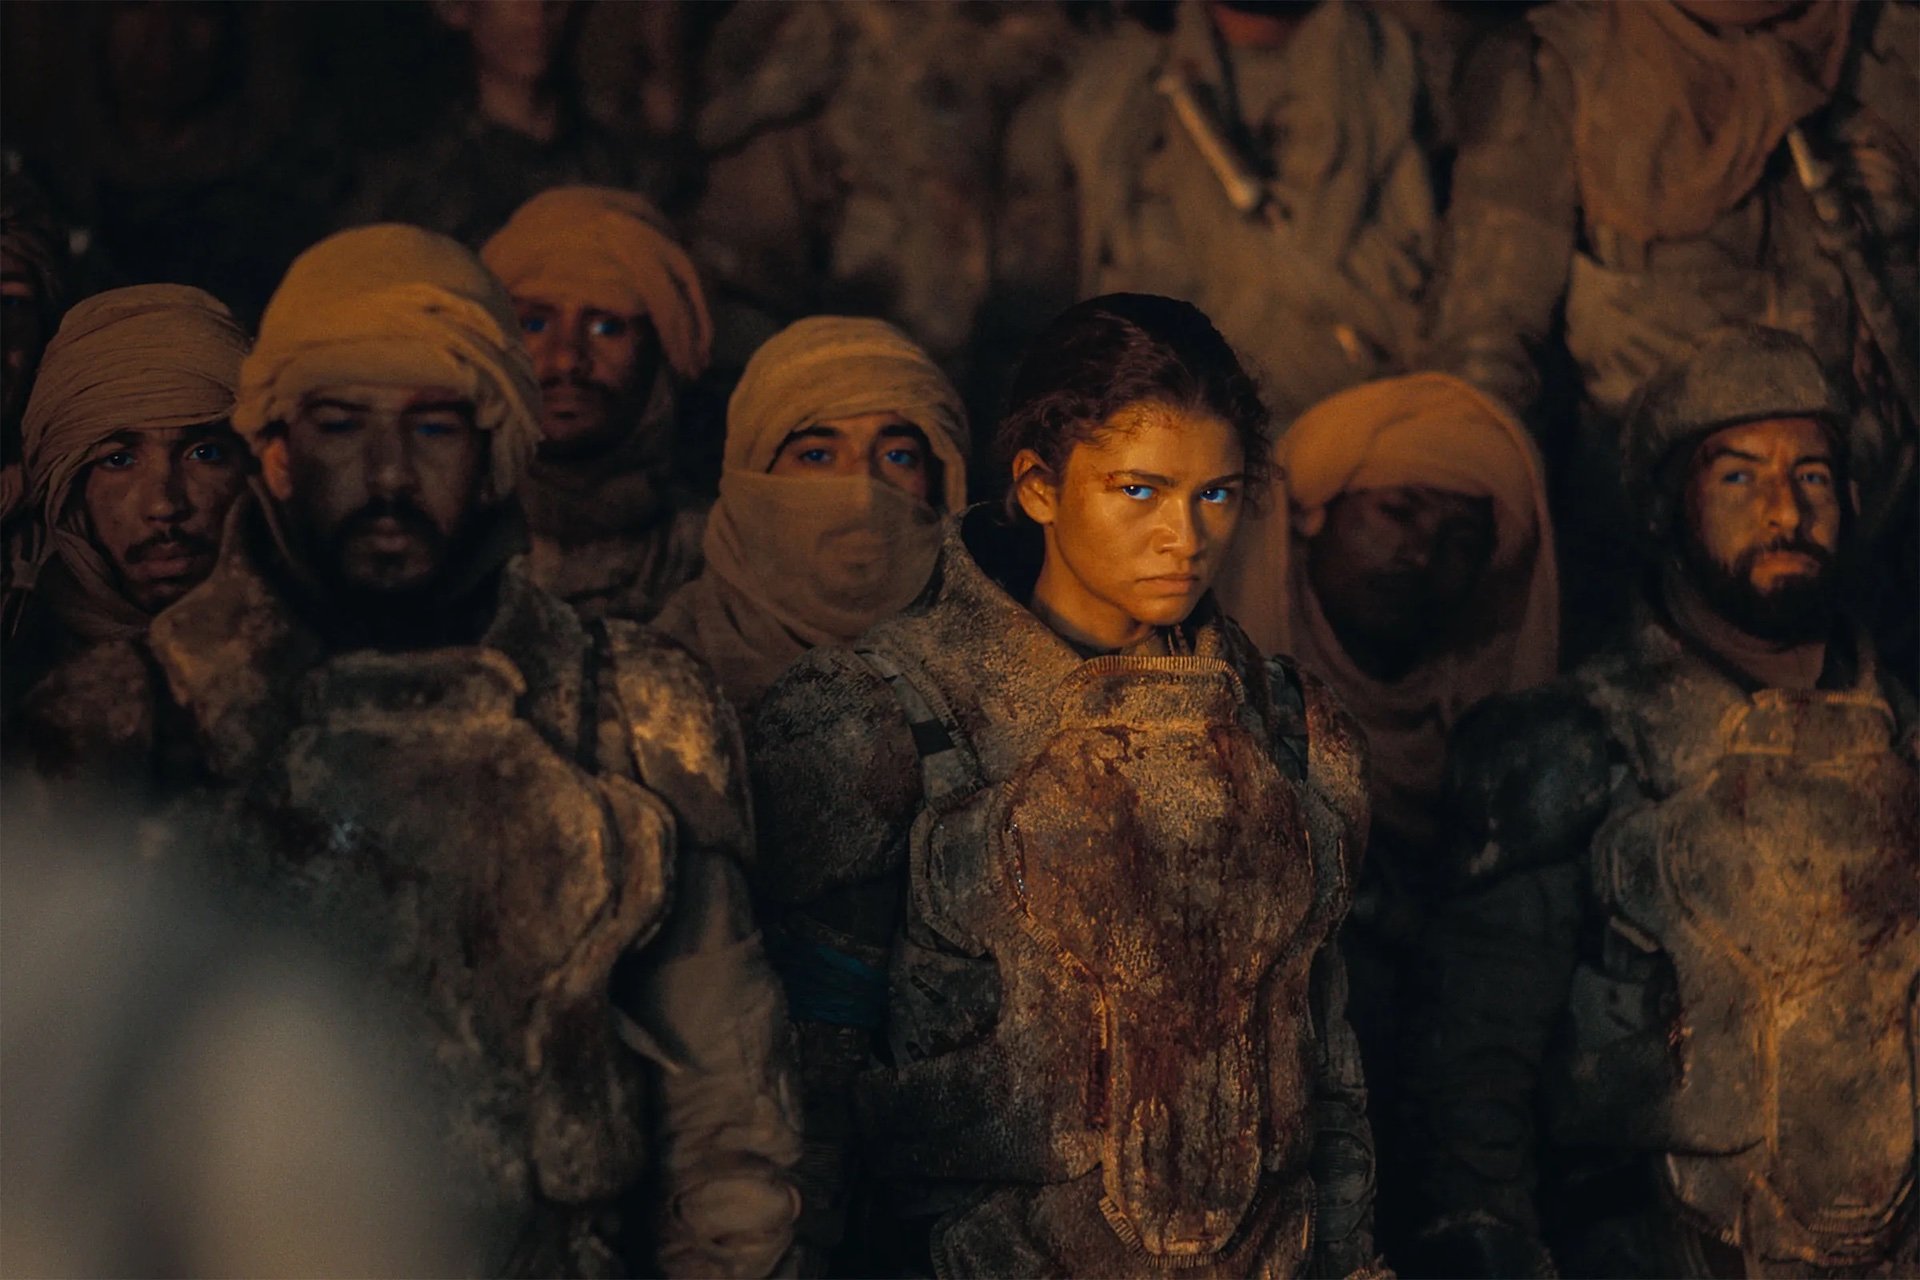  Chani (Zendaya) and the other Fremen watching Paul in 'Dune: Part Two'